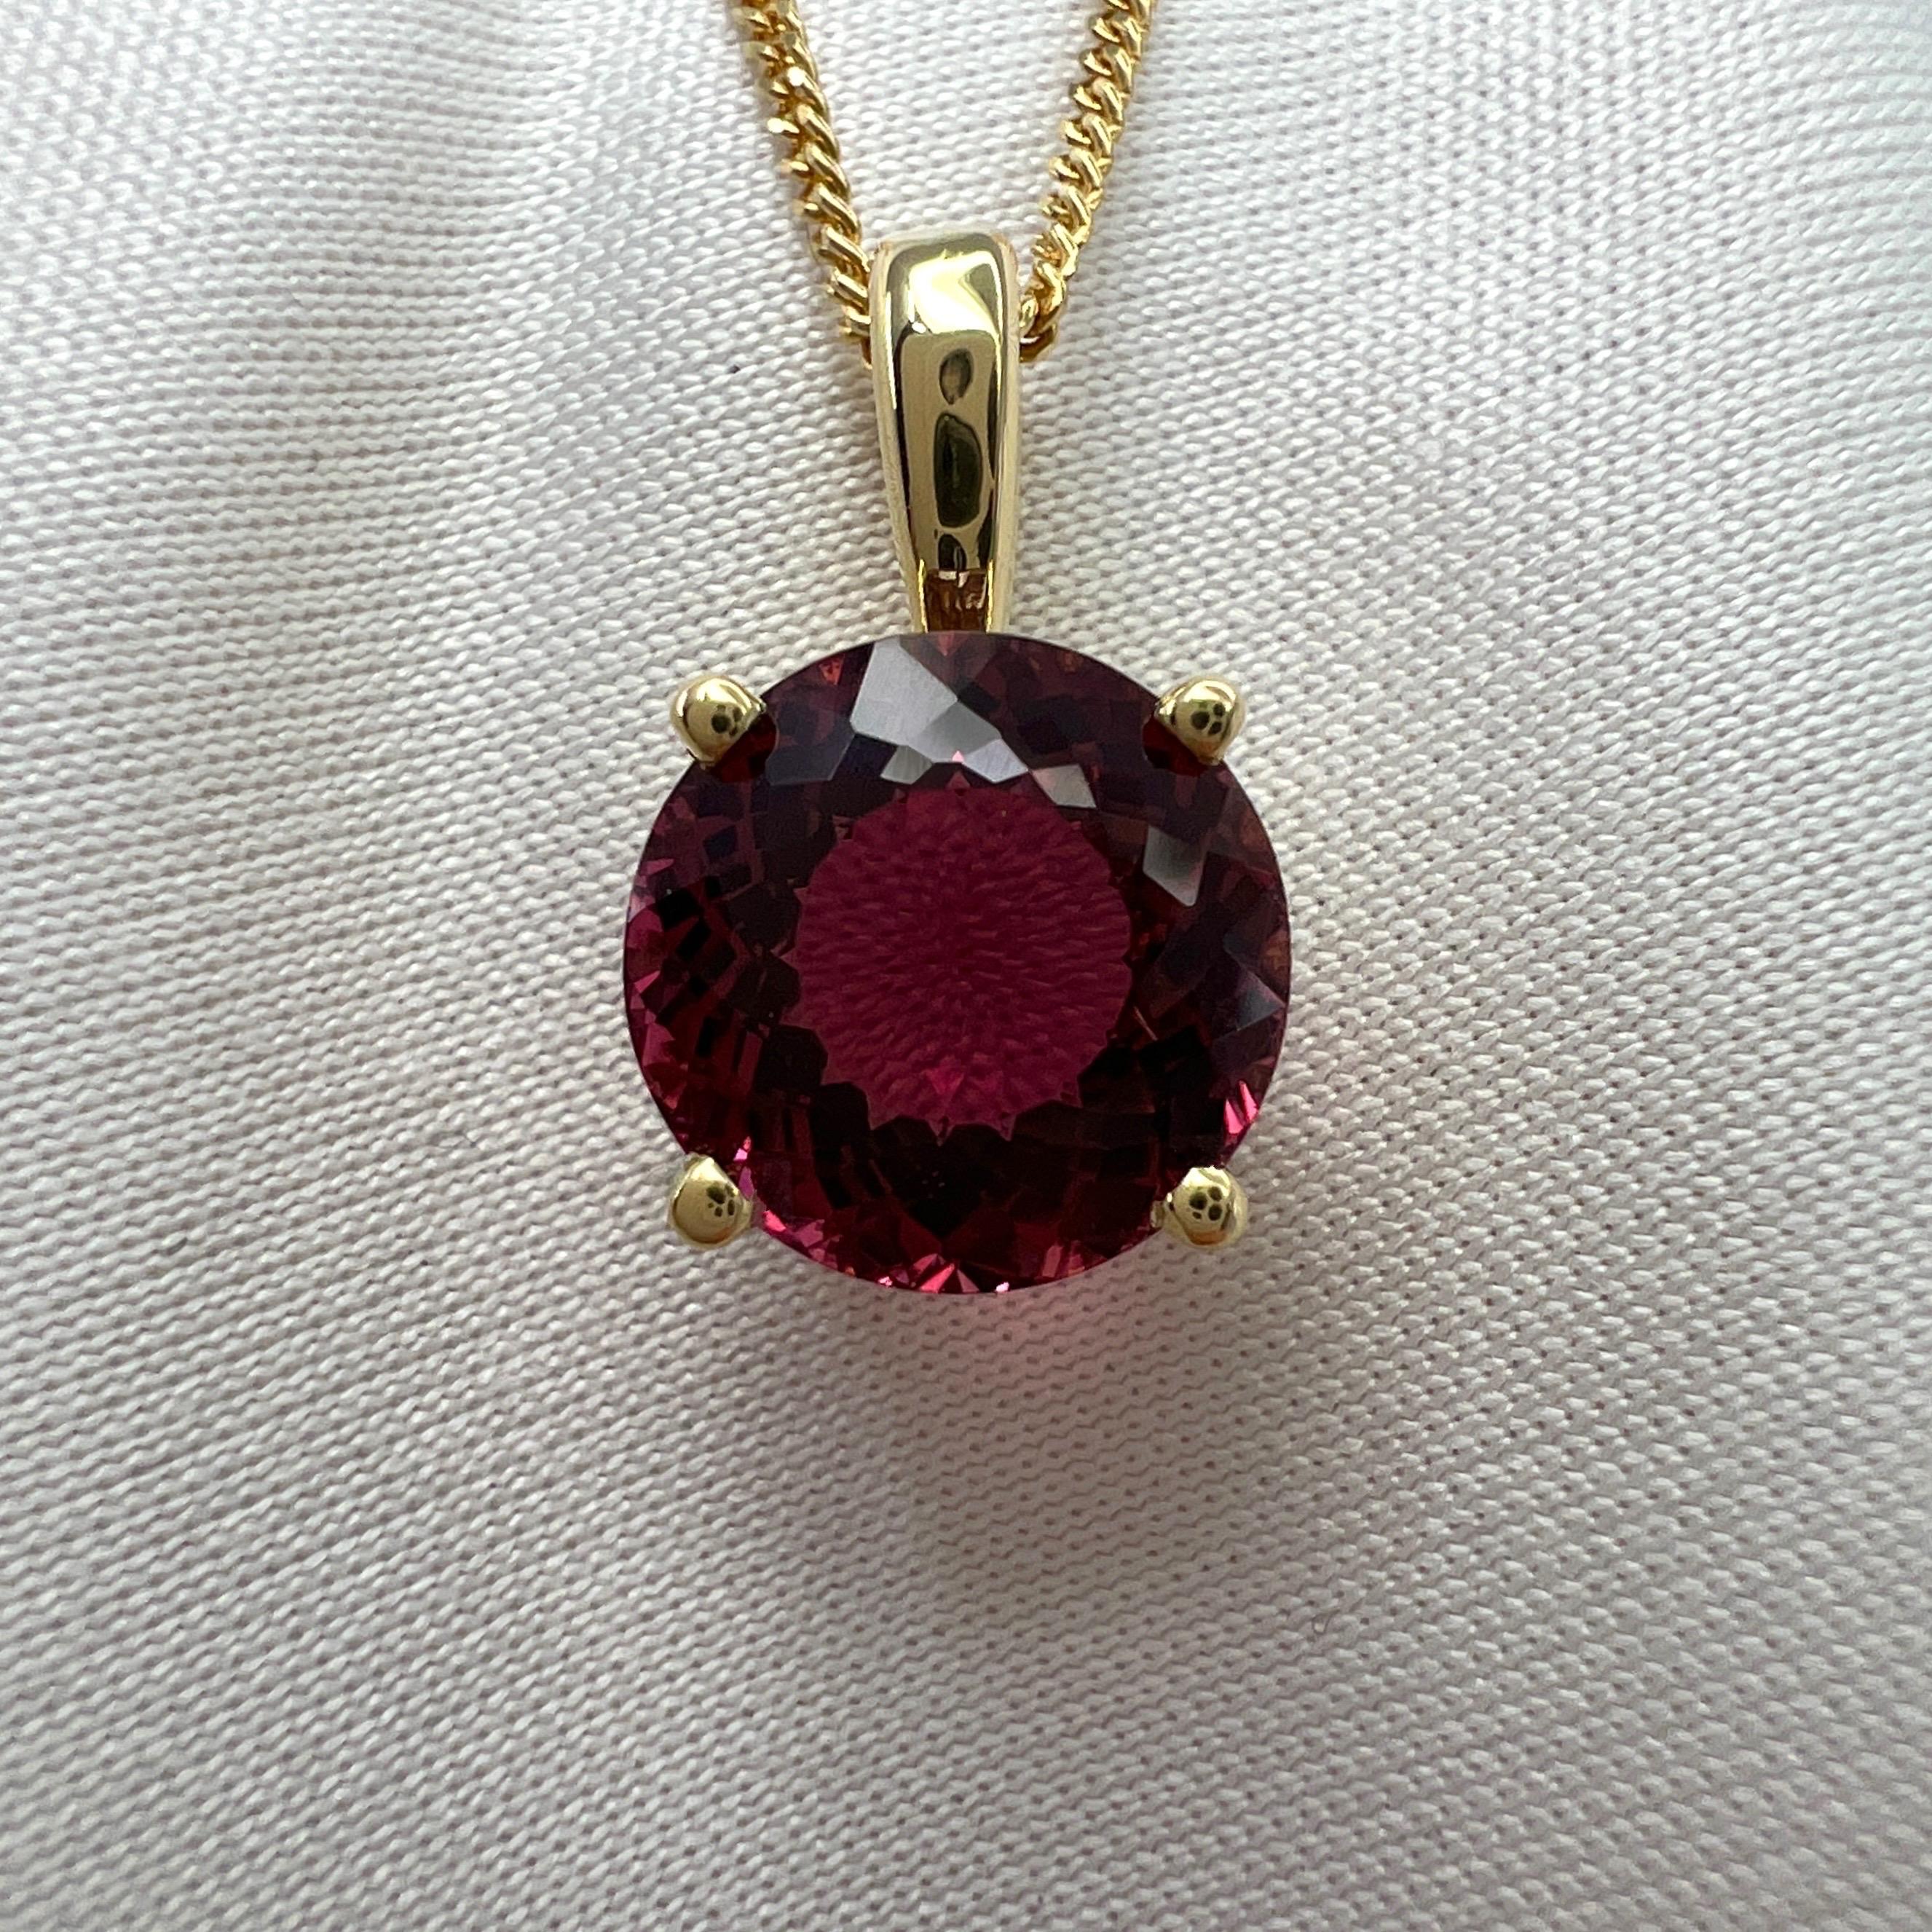 Fancy Round Cut Pink Orange Rubellite Tourmaline 18k Yellow Gold Pendant Necklace. 

2.56 Carat rubellite tourmaline with a beautiful deep pink orange colour, excellent clarity and an excellent fancy round cut.
Set in a fine 18k yellow gold